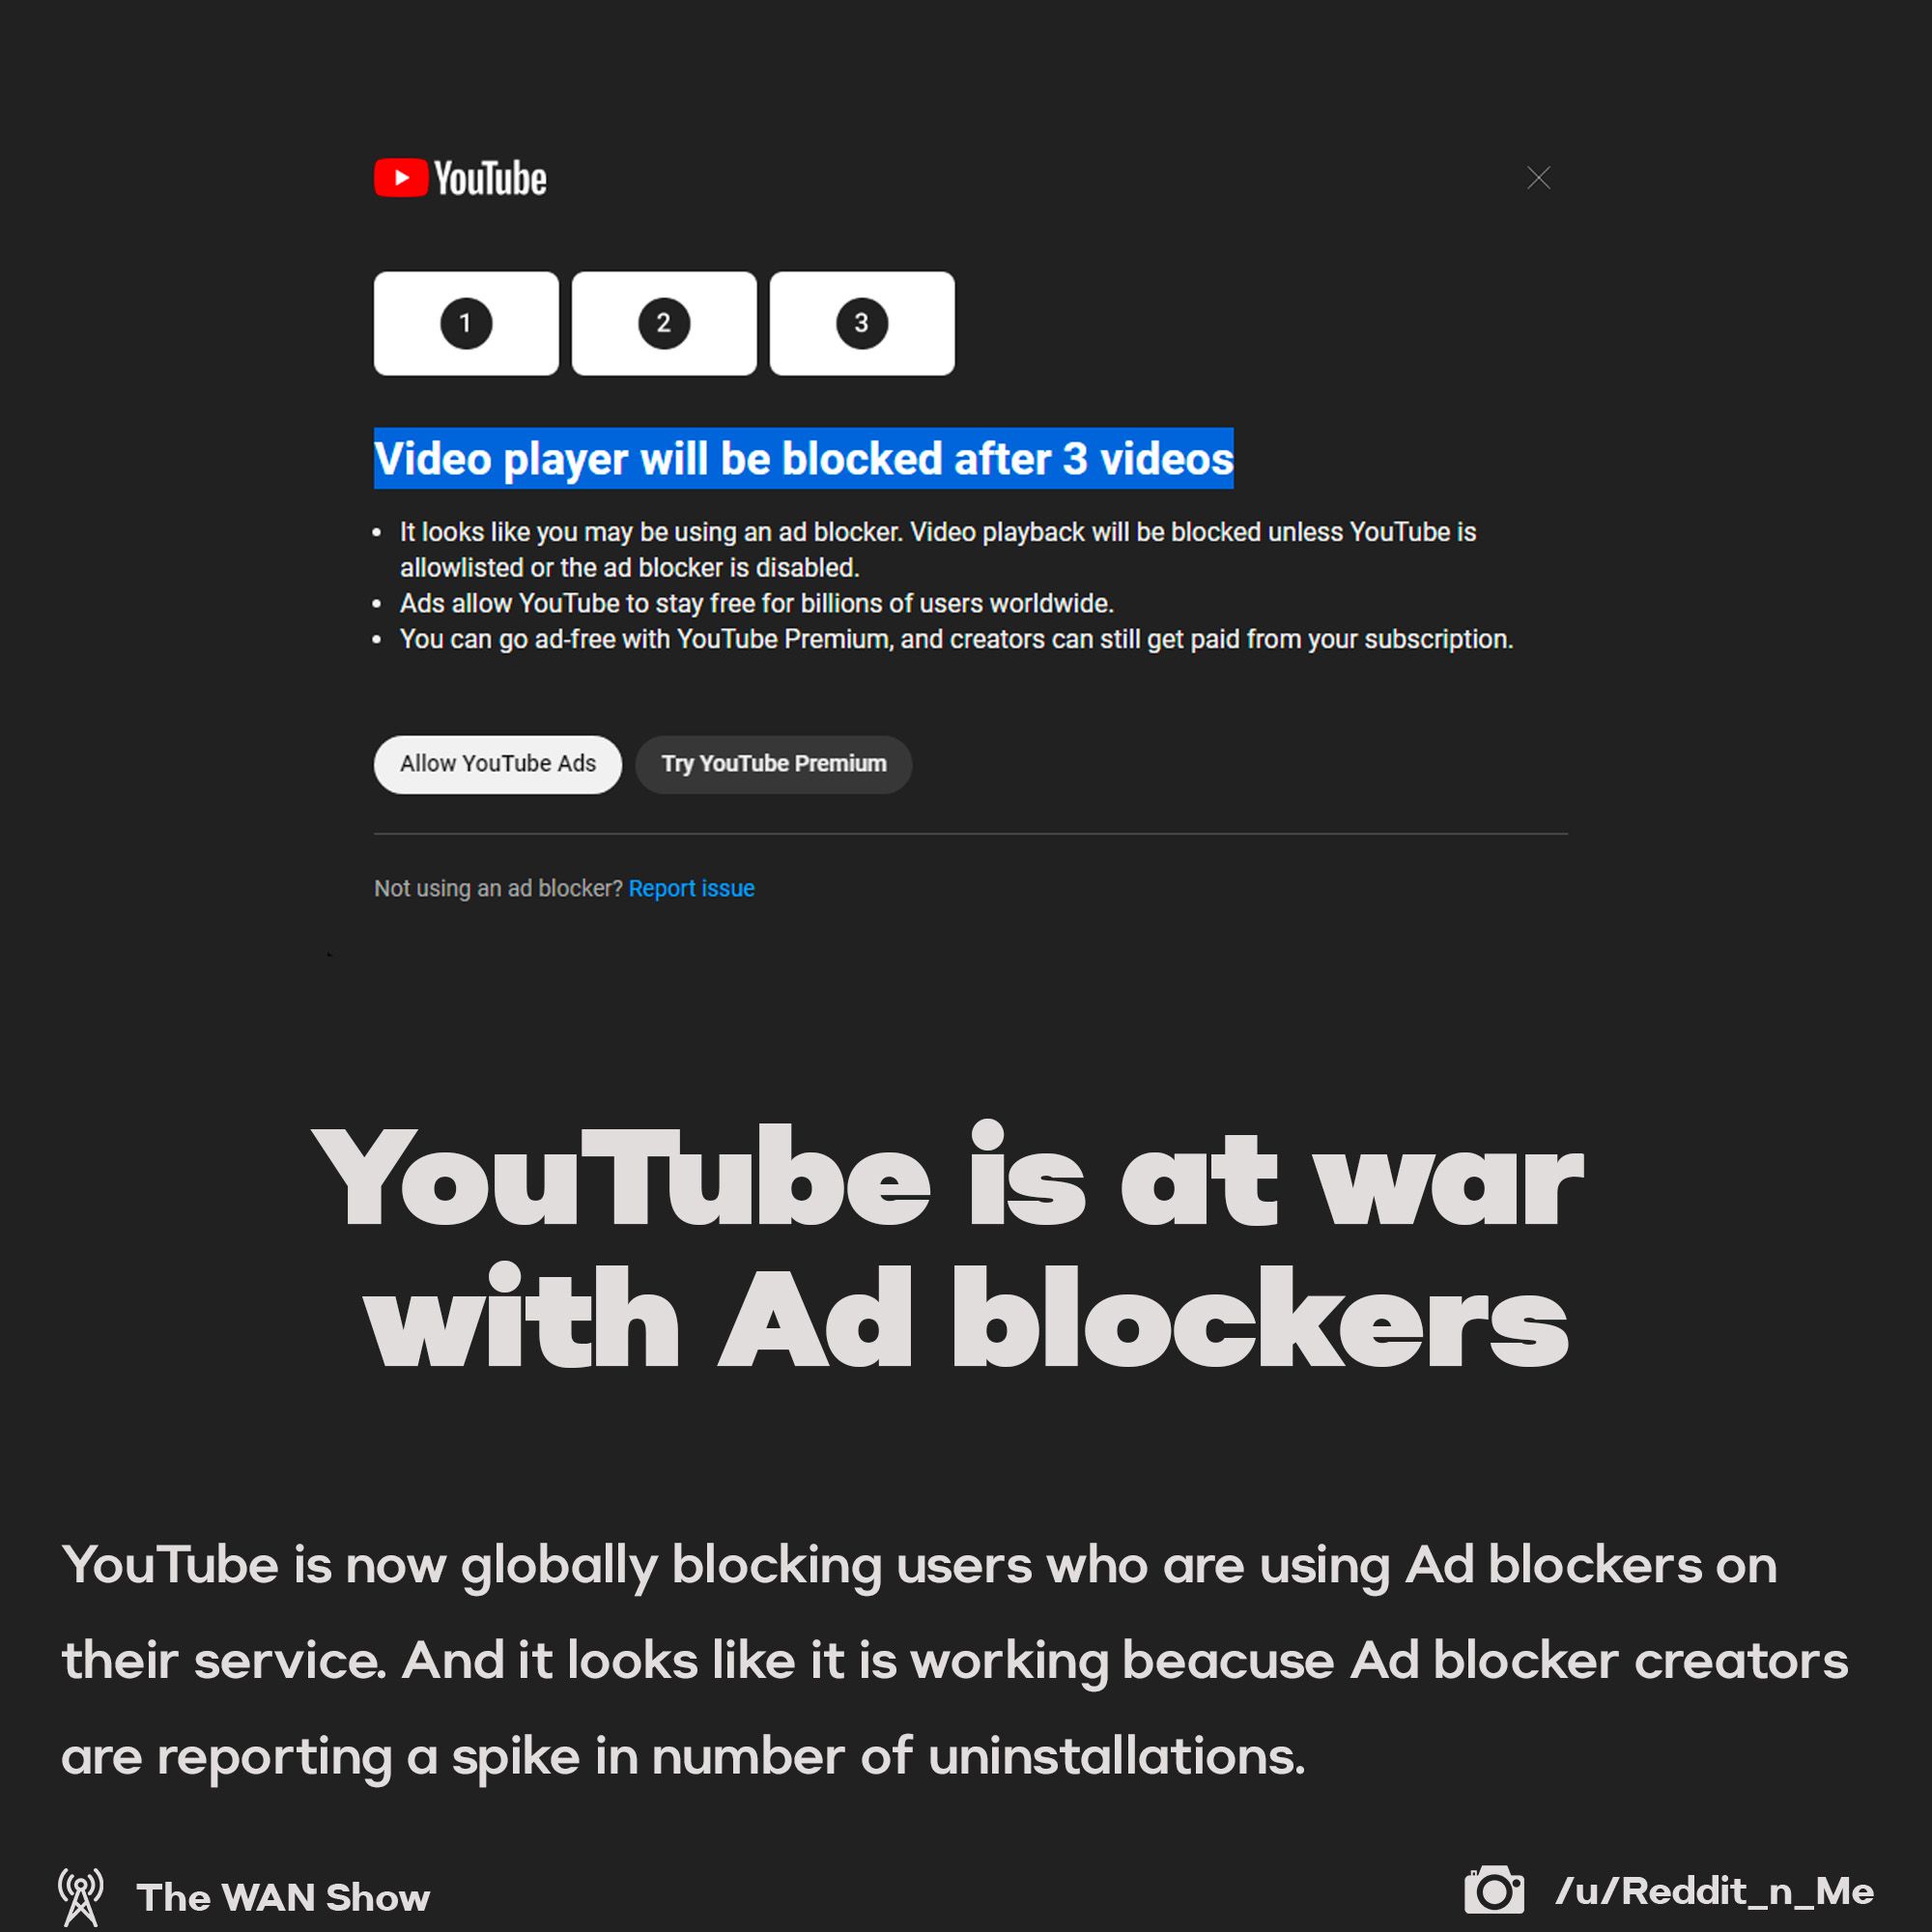 YouTube is at war with Ad blockers